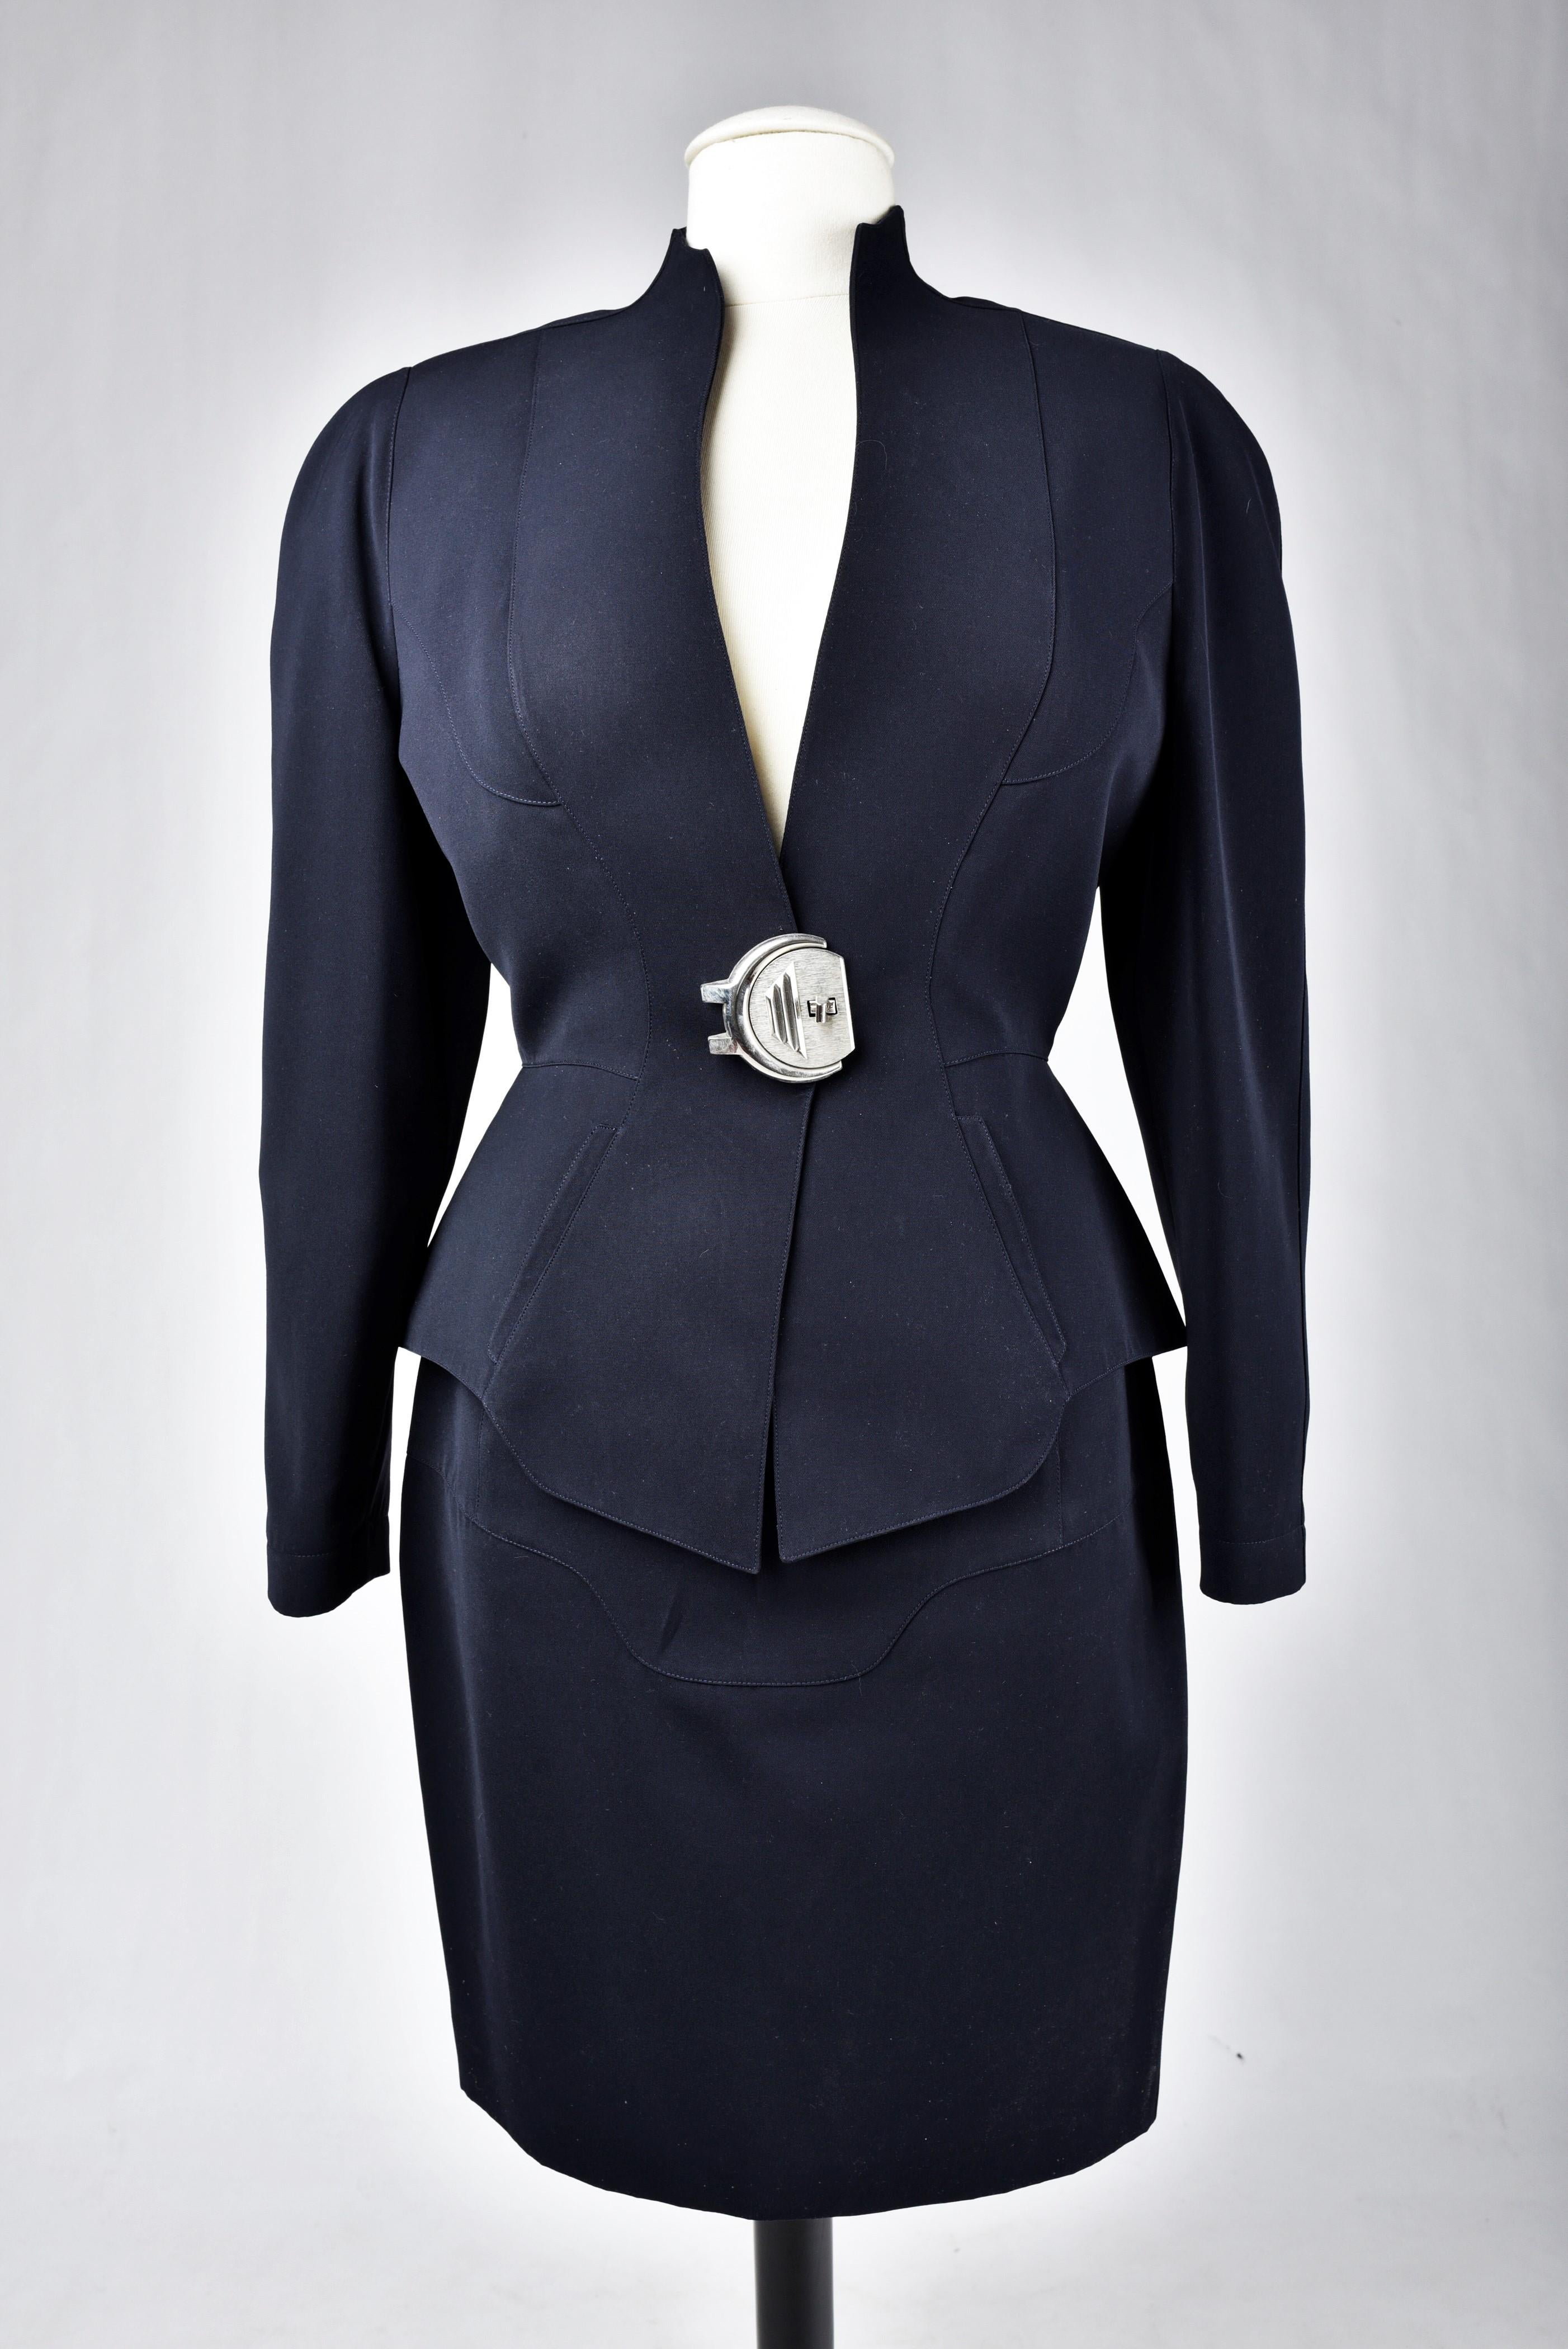 A Thierry Mugler Couture Black Tuxedo Skirt Suit - France Circa 1990/2000 For Sale 11